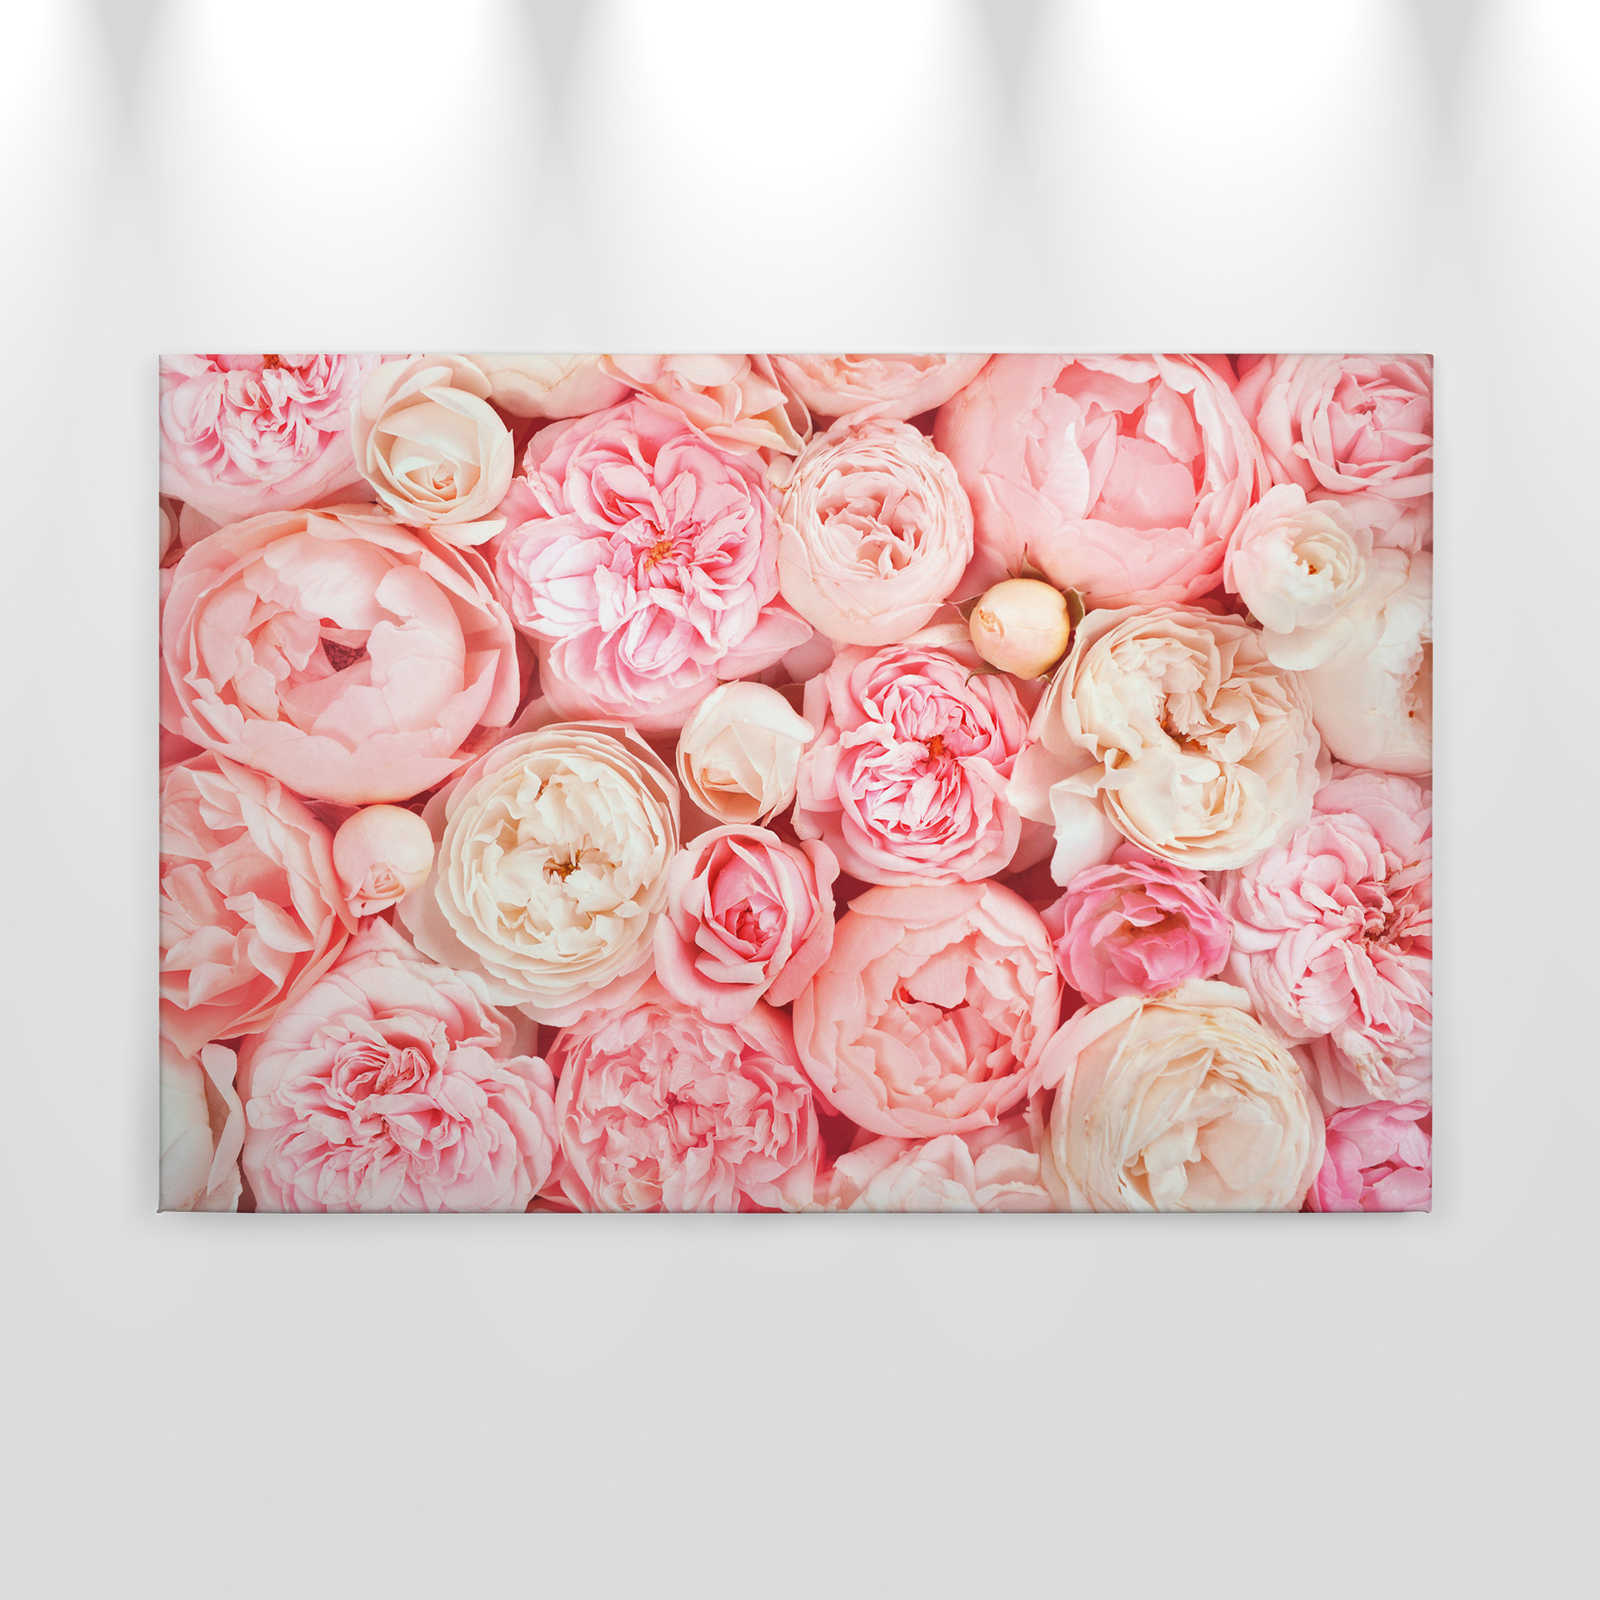             Canvas with roses motif - 0.90 m x 0.60 m
        